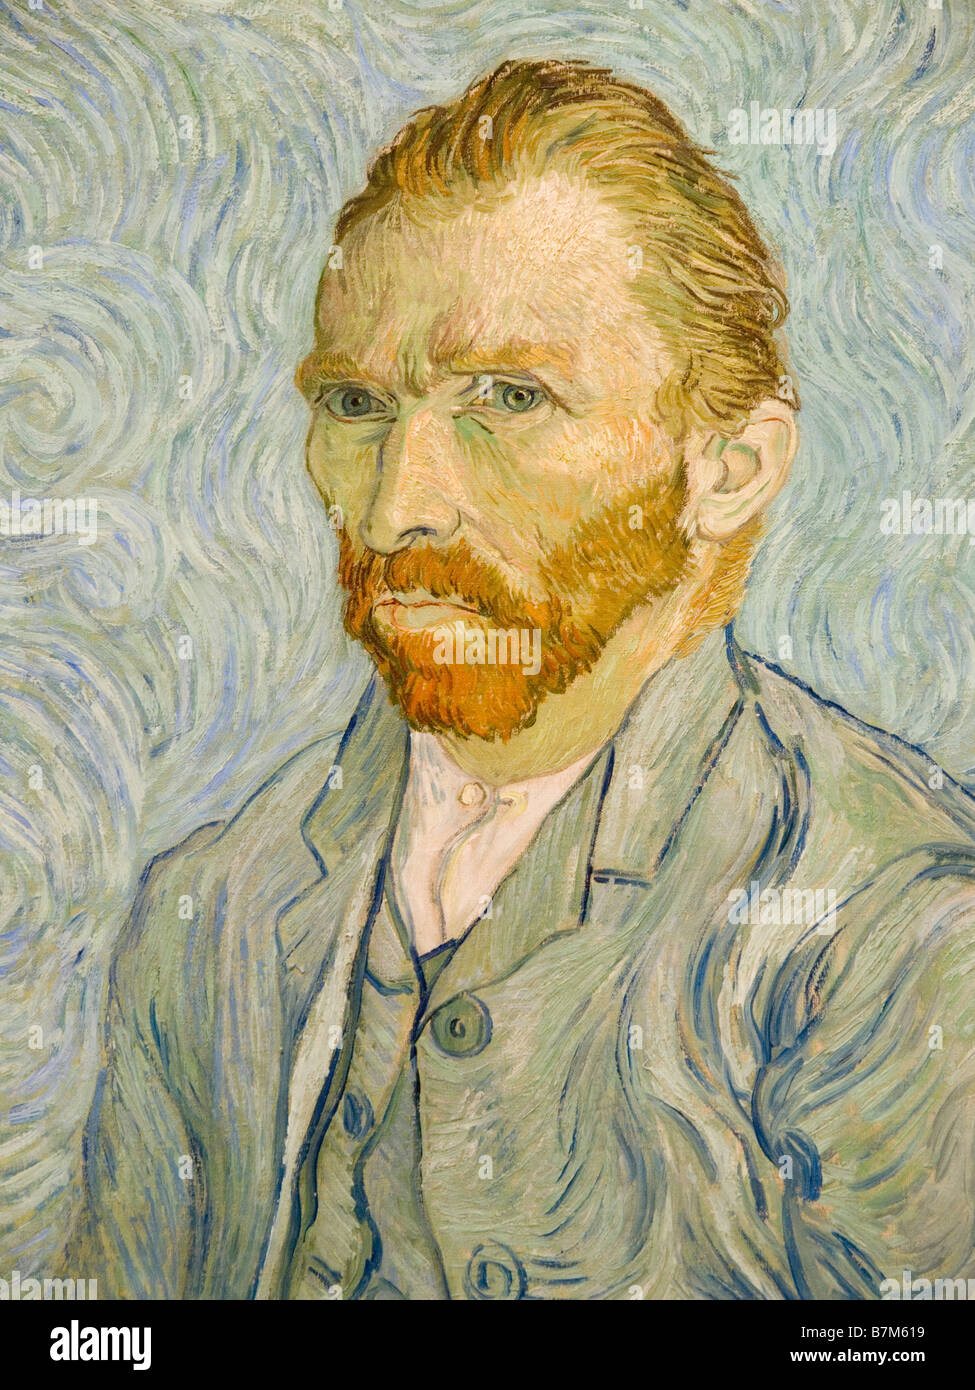 A Self Portrait, painted by Vincent Van Gogh in 1889. At the Musee D'Orsay in Paris, France Europe Stock Photo